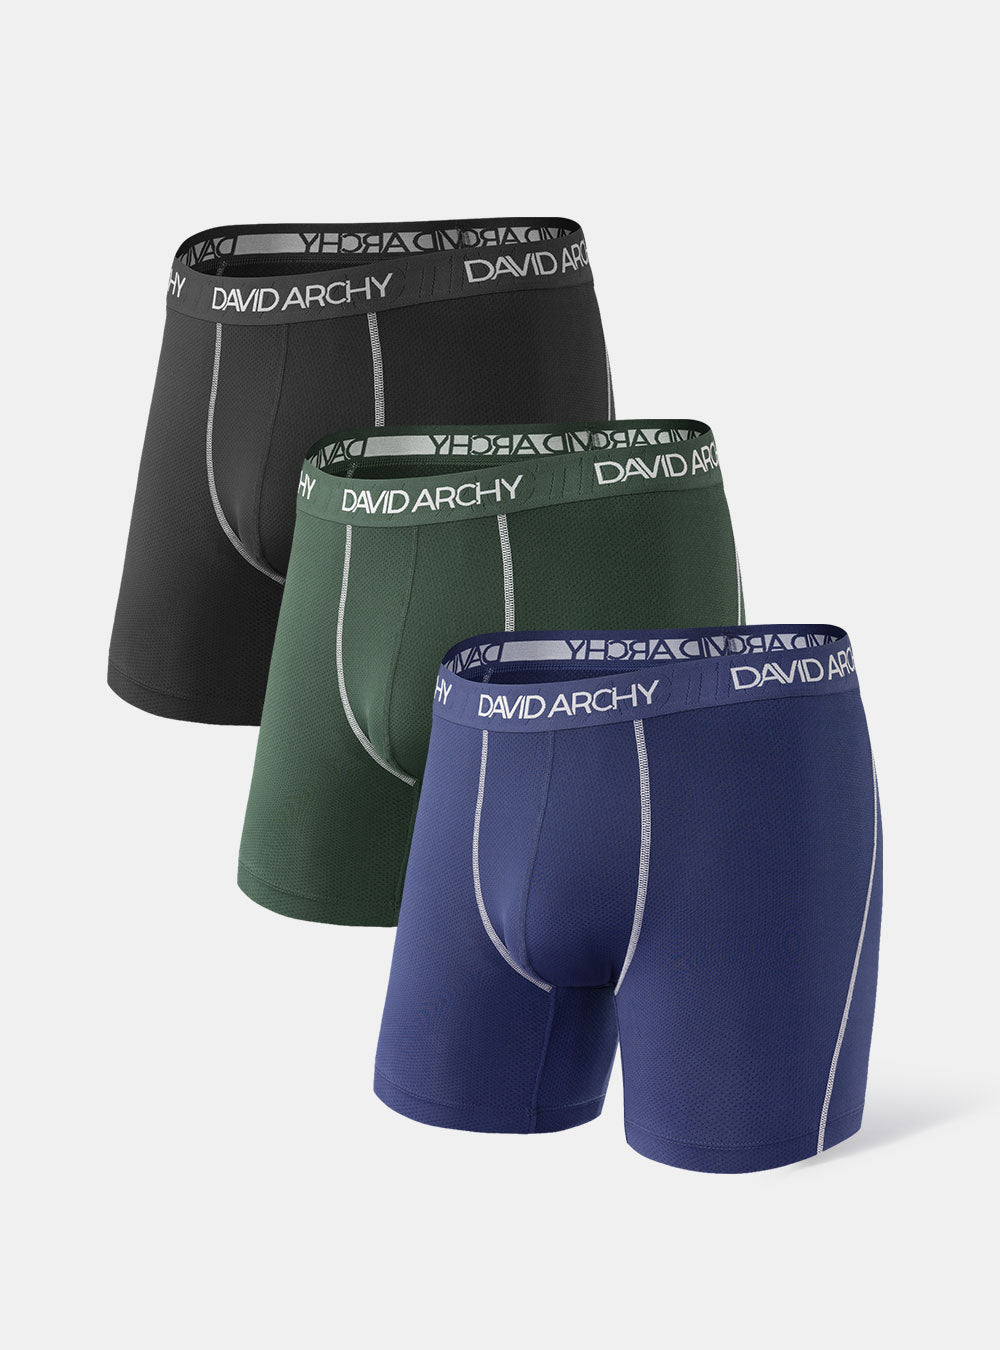 DAVID ARCHY Men's Breathable Bamboo Rayon Boxer Briefs with Fly in 3 or 4  Pack(XL